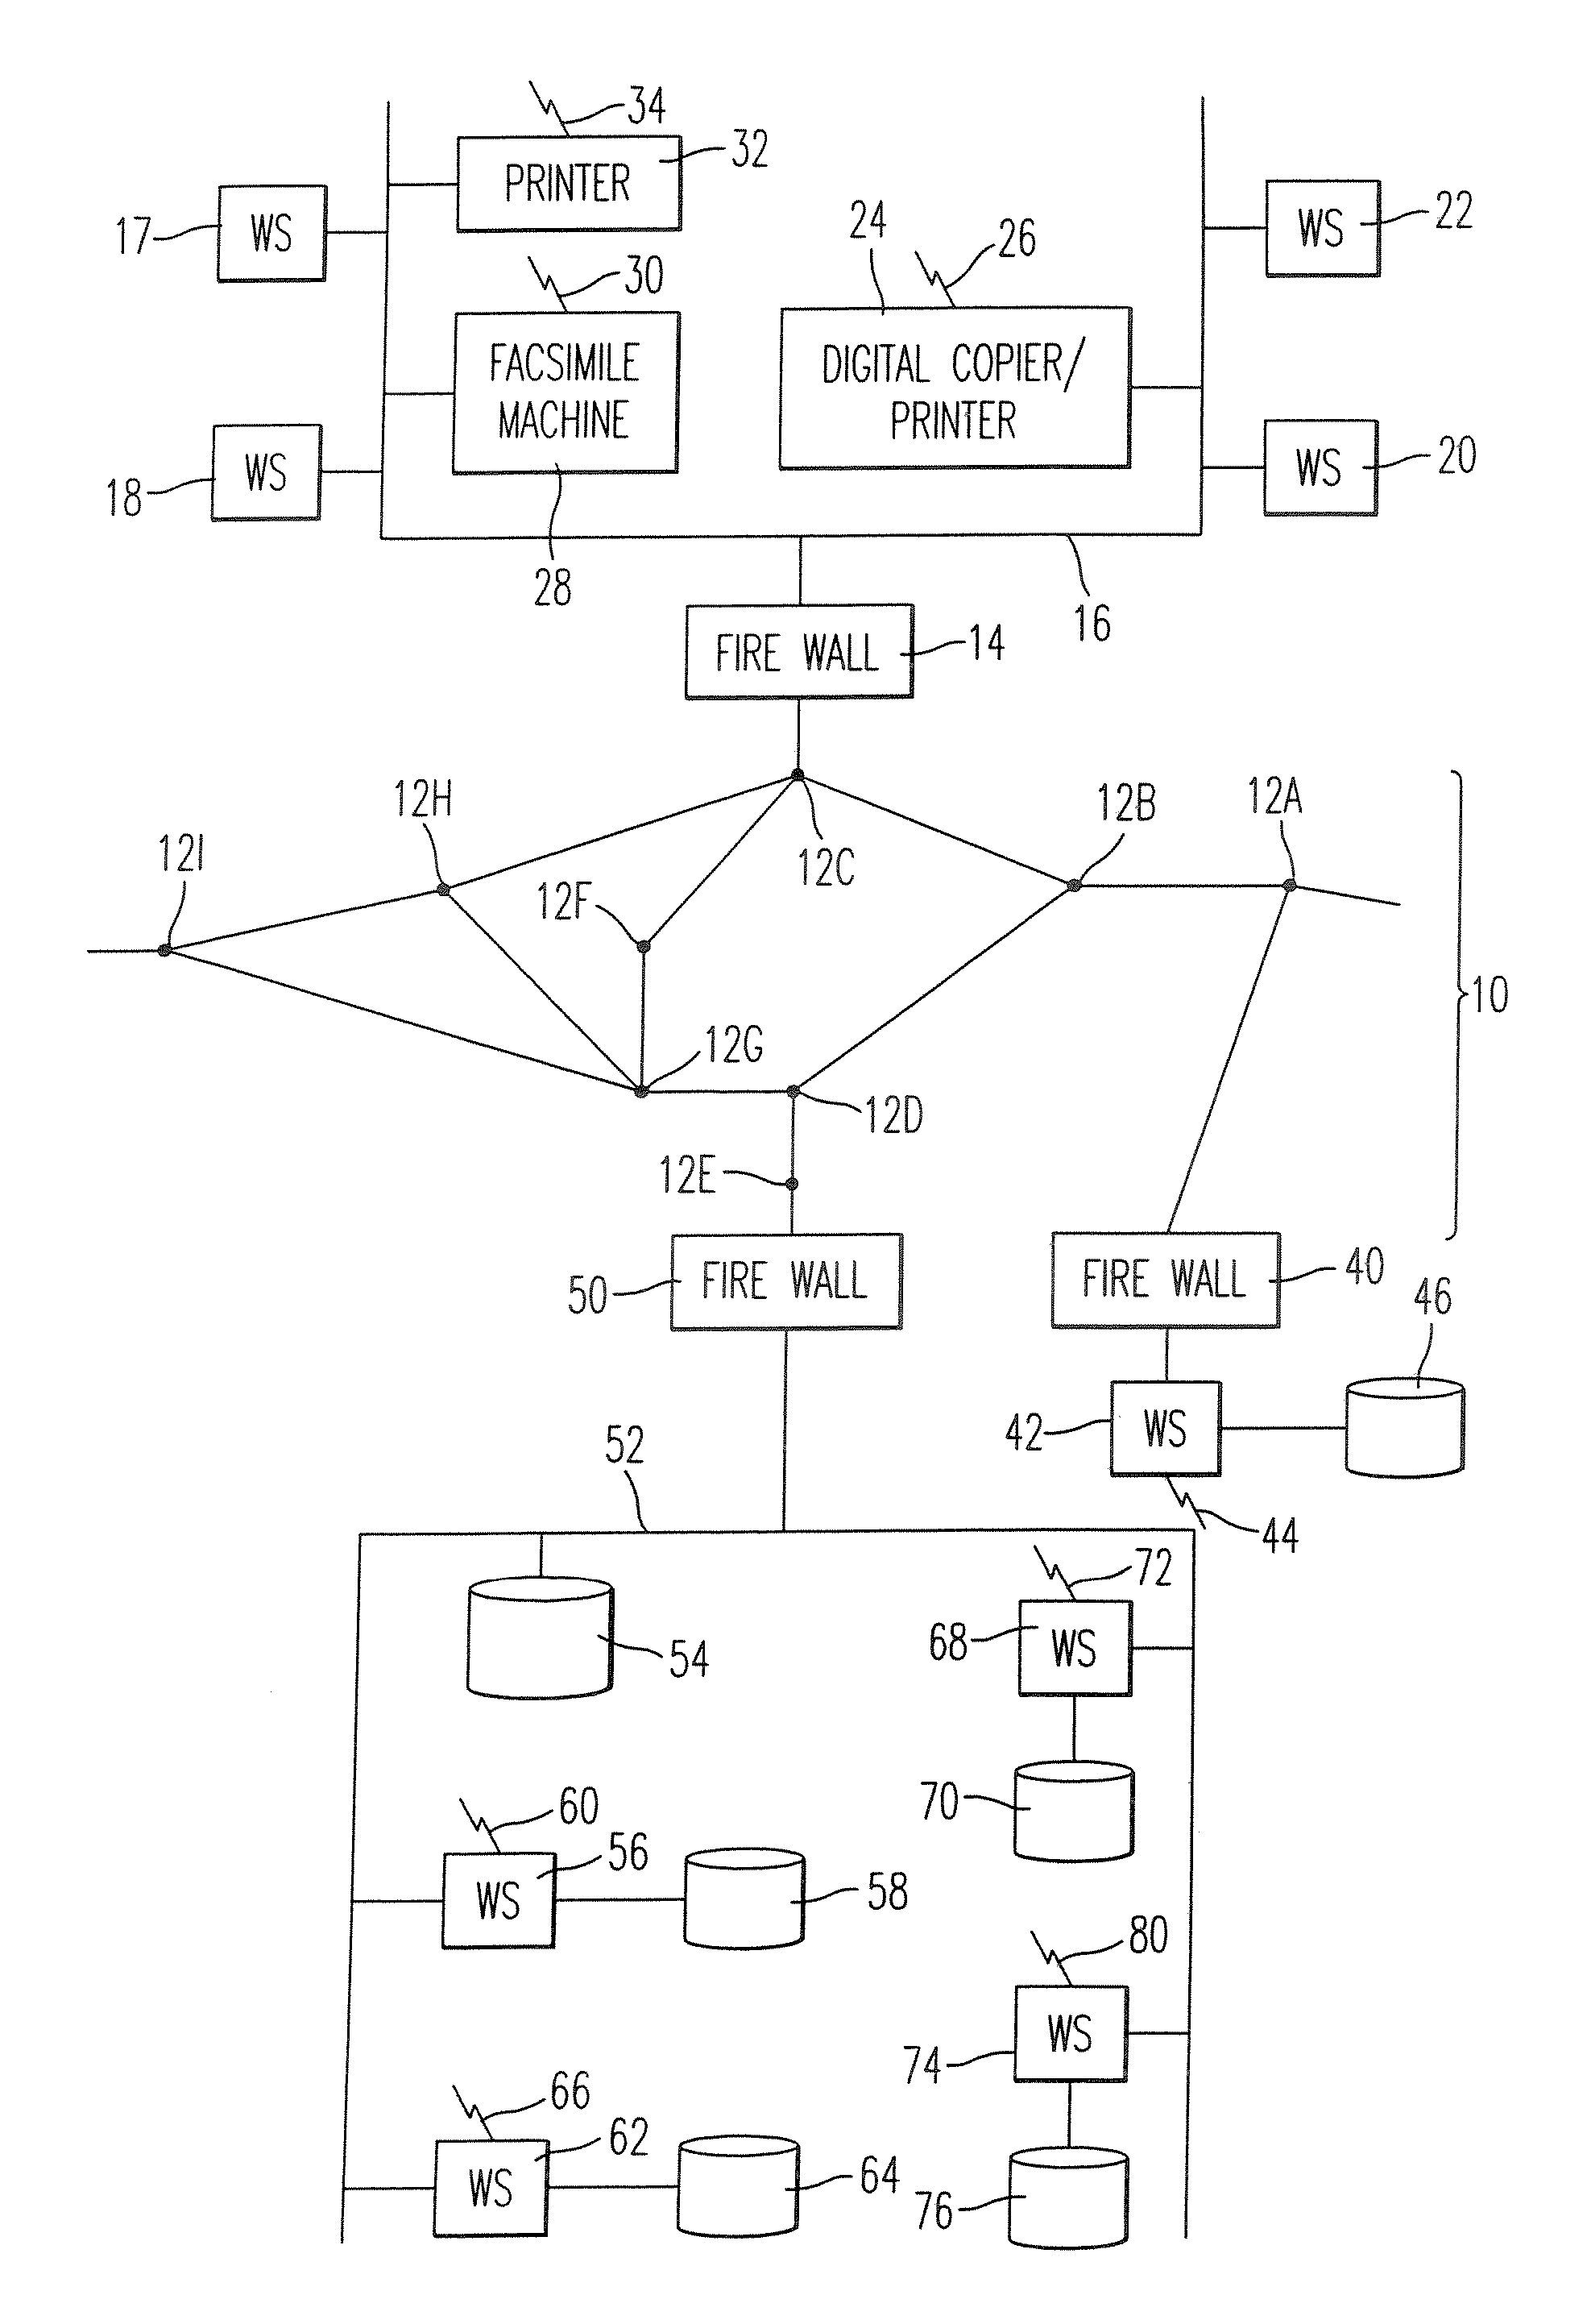 Method and system for diagnosis and control of machines using connectionless modes having delivery monitoring and an alternate communication mode